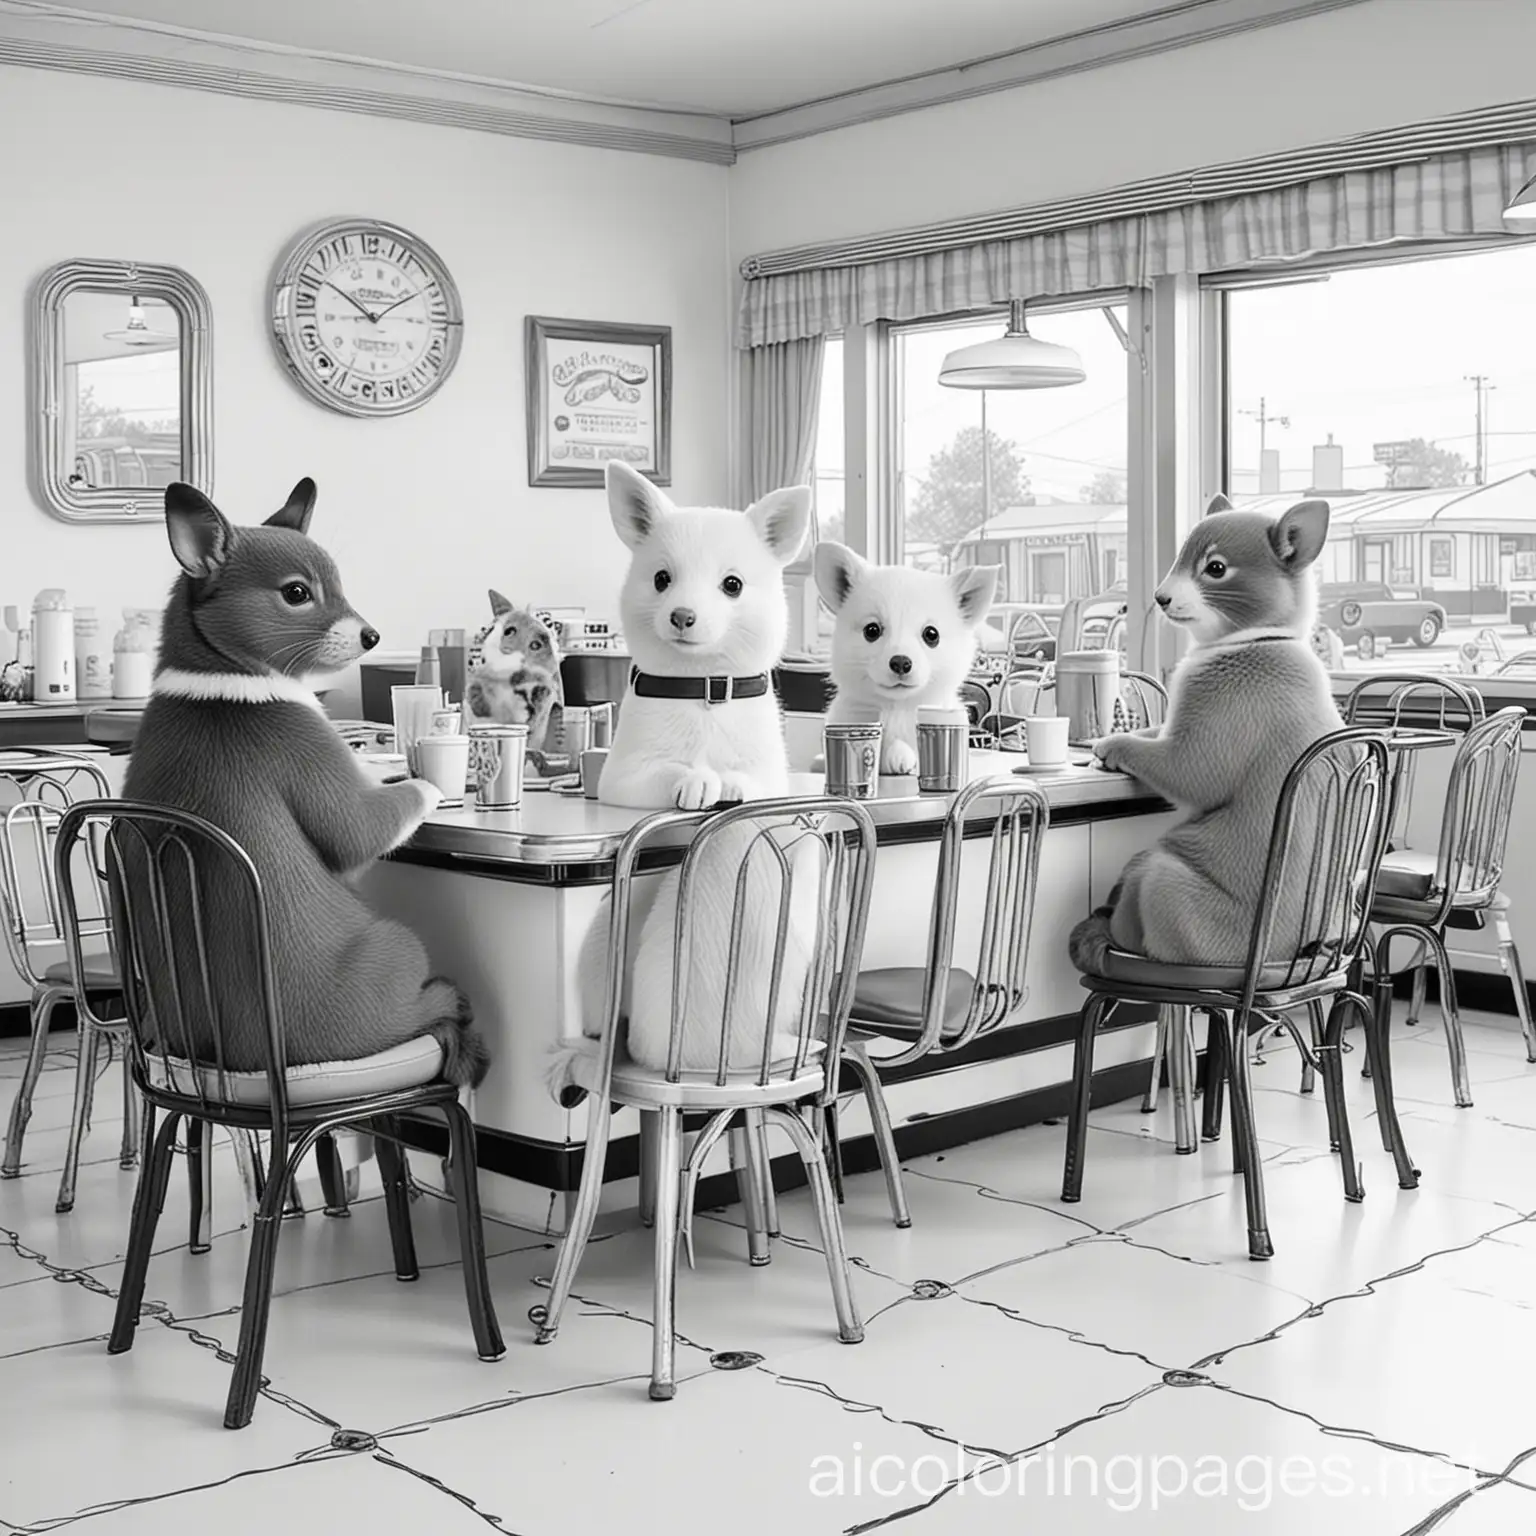 Cute animals in a 50s style diner, Coloring Page, black and white, line art, white background, Simplicity, Ample White Space. The background of the coloring page is plain white to make it easy for young children to color within the lines. The outlines of all the subjects are easy to distinguish, making it simple for kids to color without too much difficulty